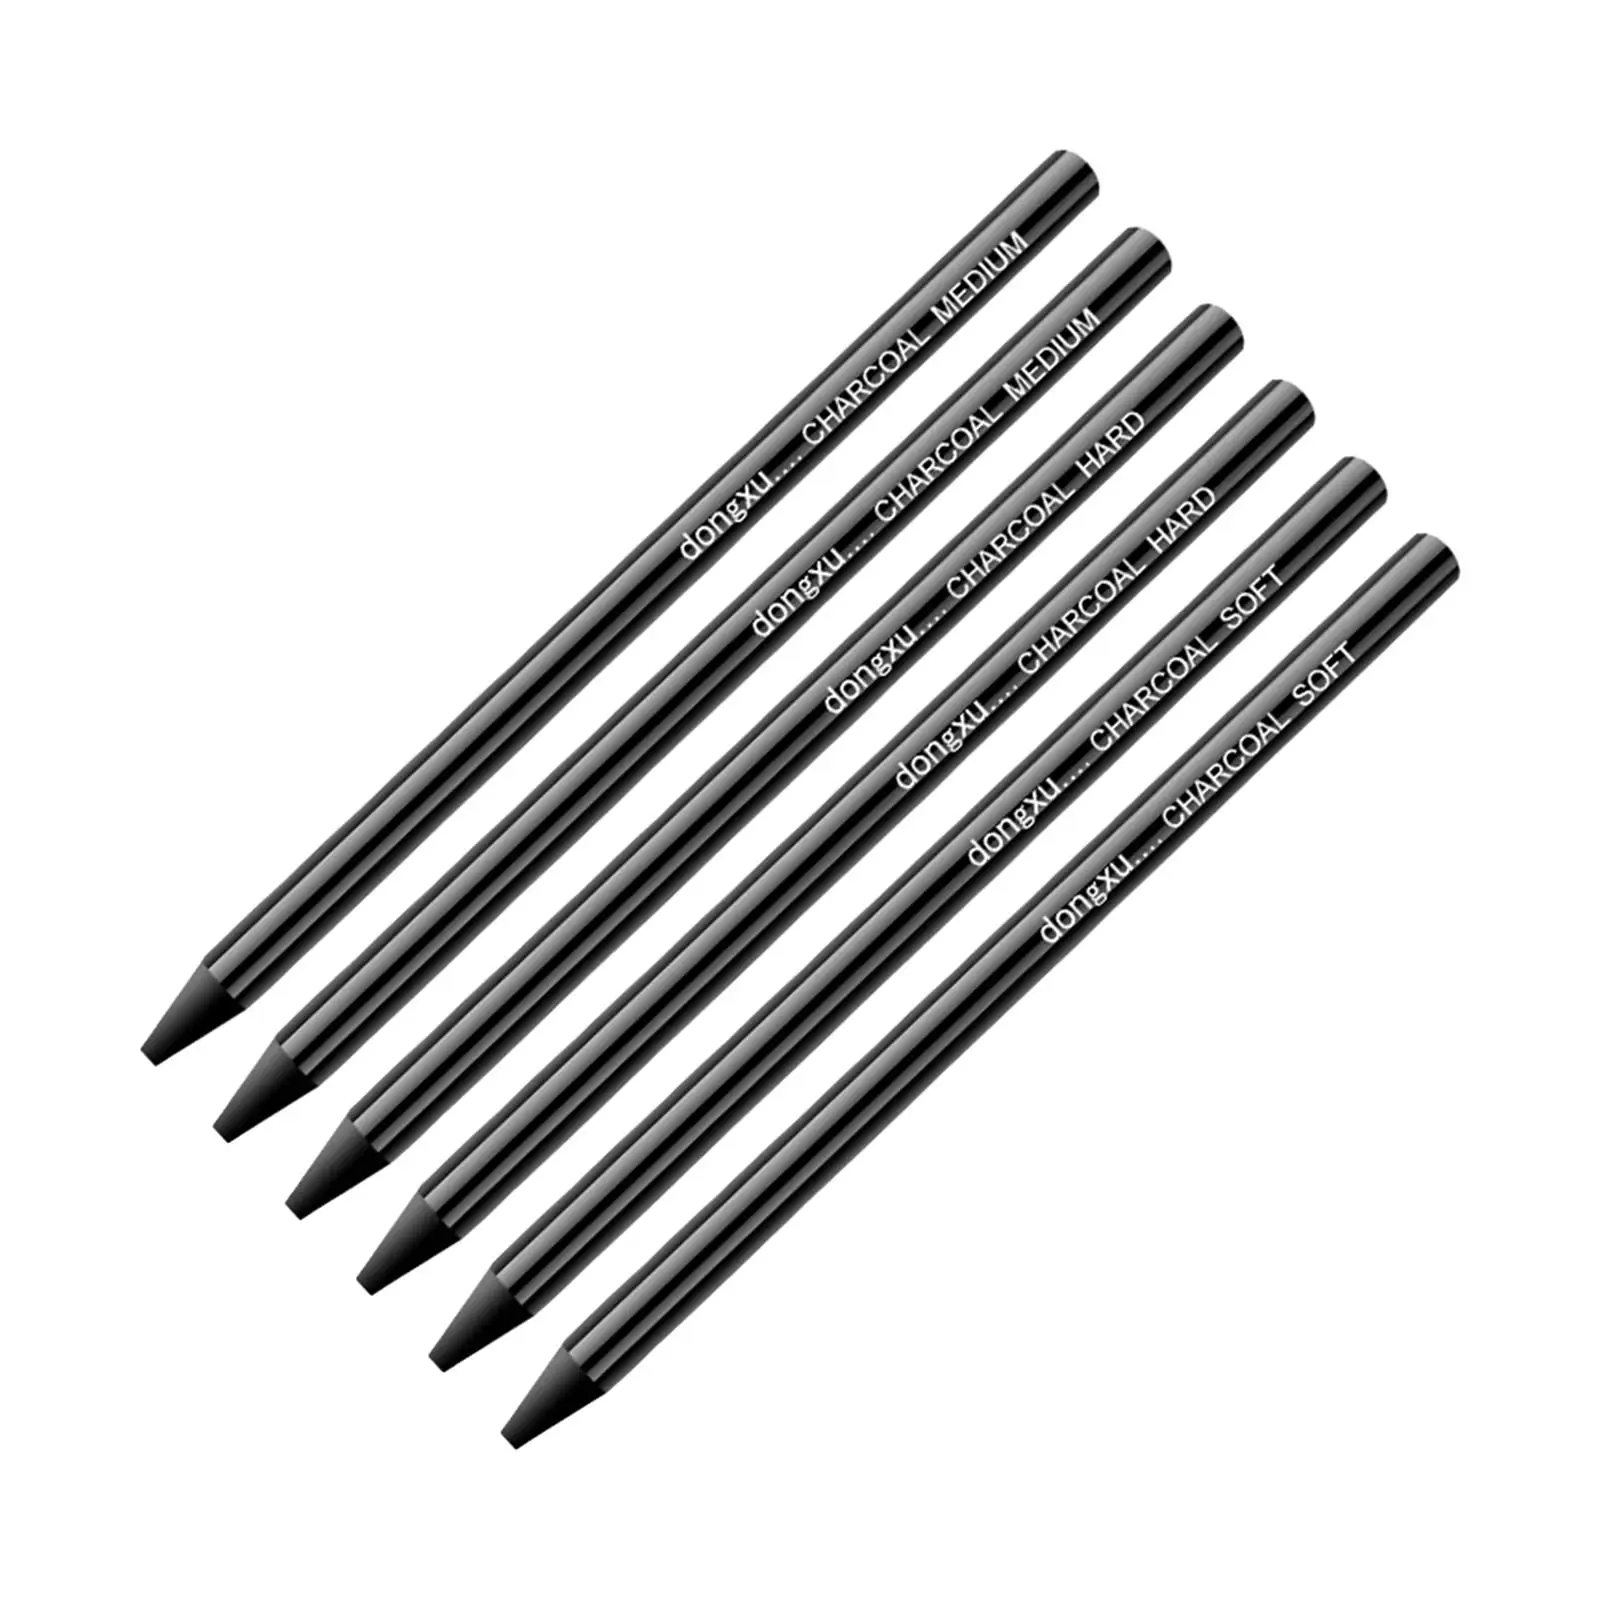 6 Pieces Sketch Carbon Strips Sketcher Artist Multipurpose Stationary Supplies Gallery Painting Home Practical Sketching Pencil